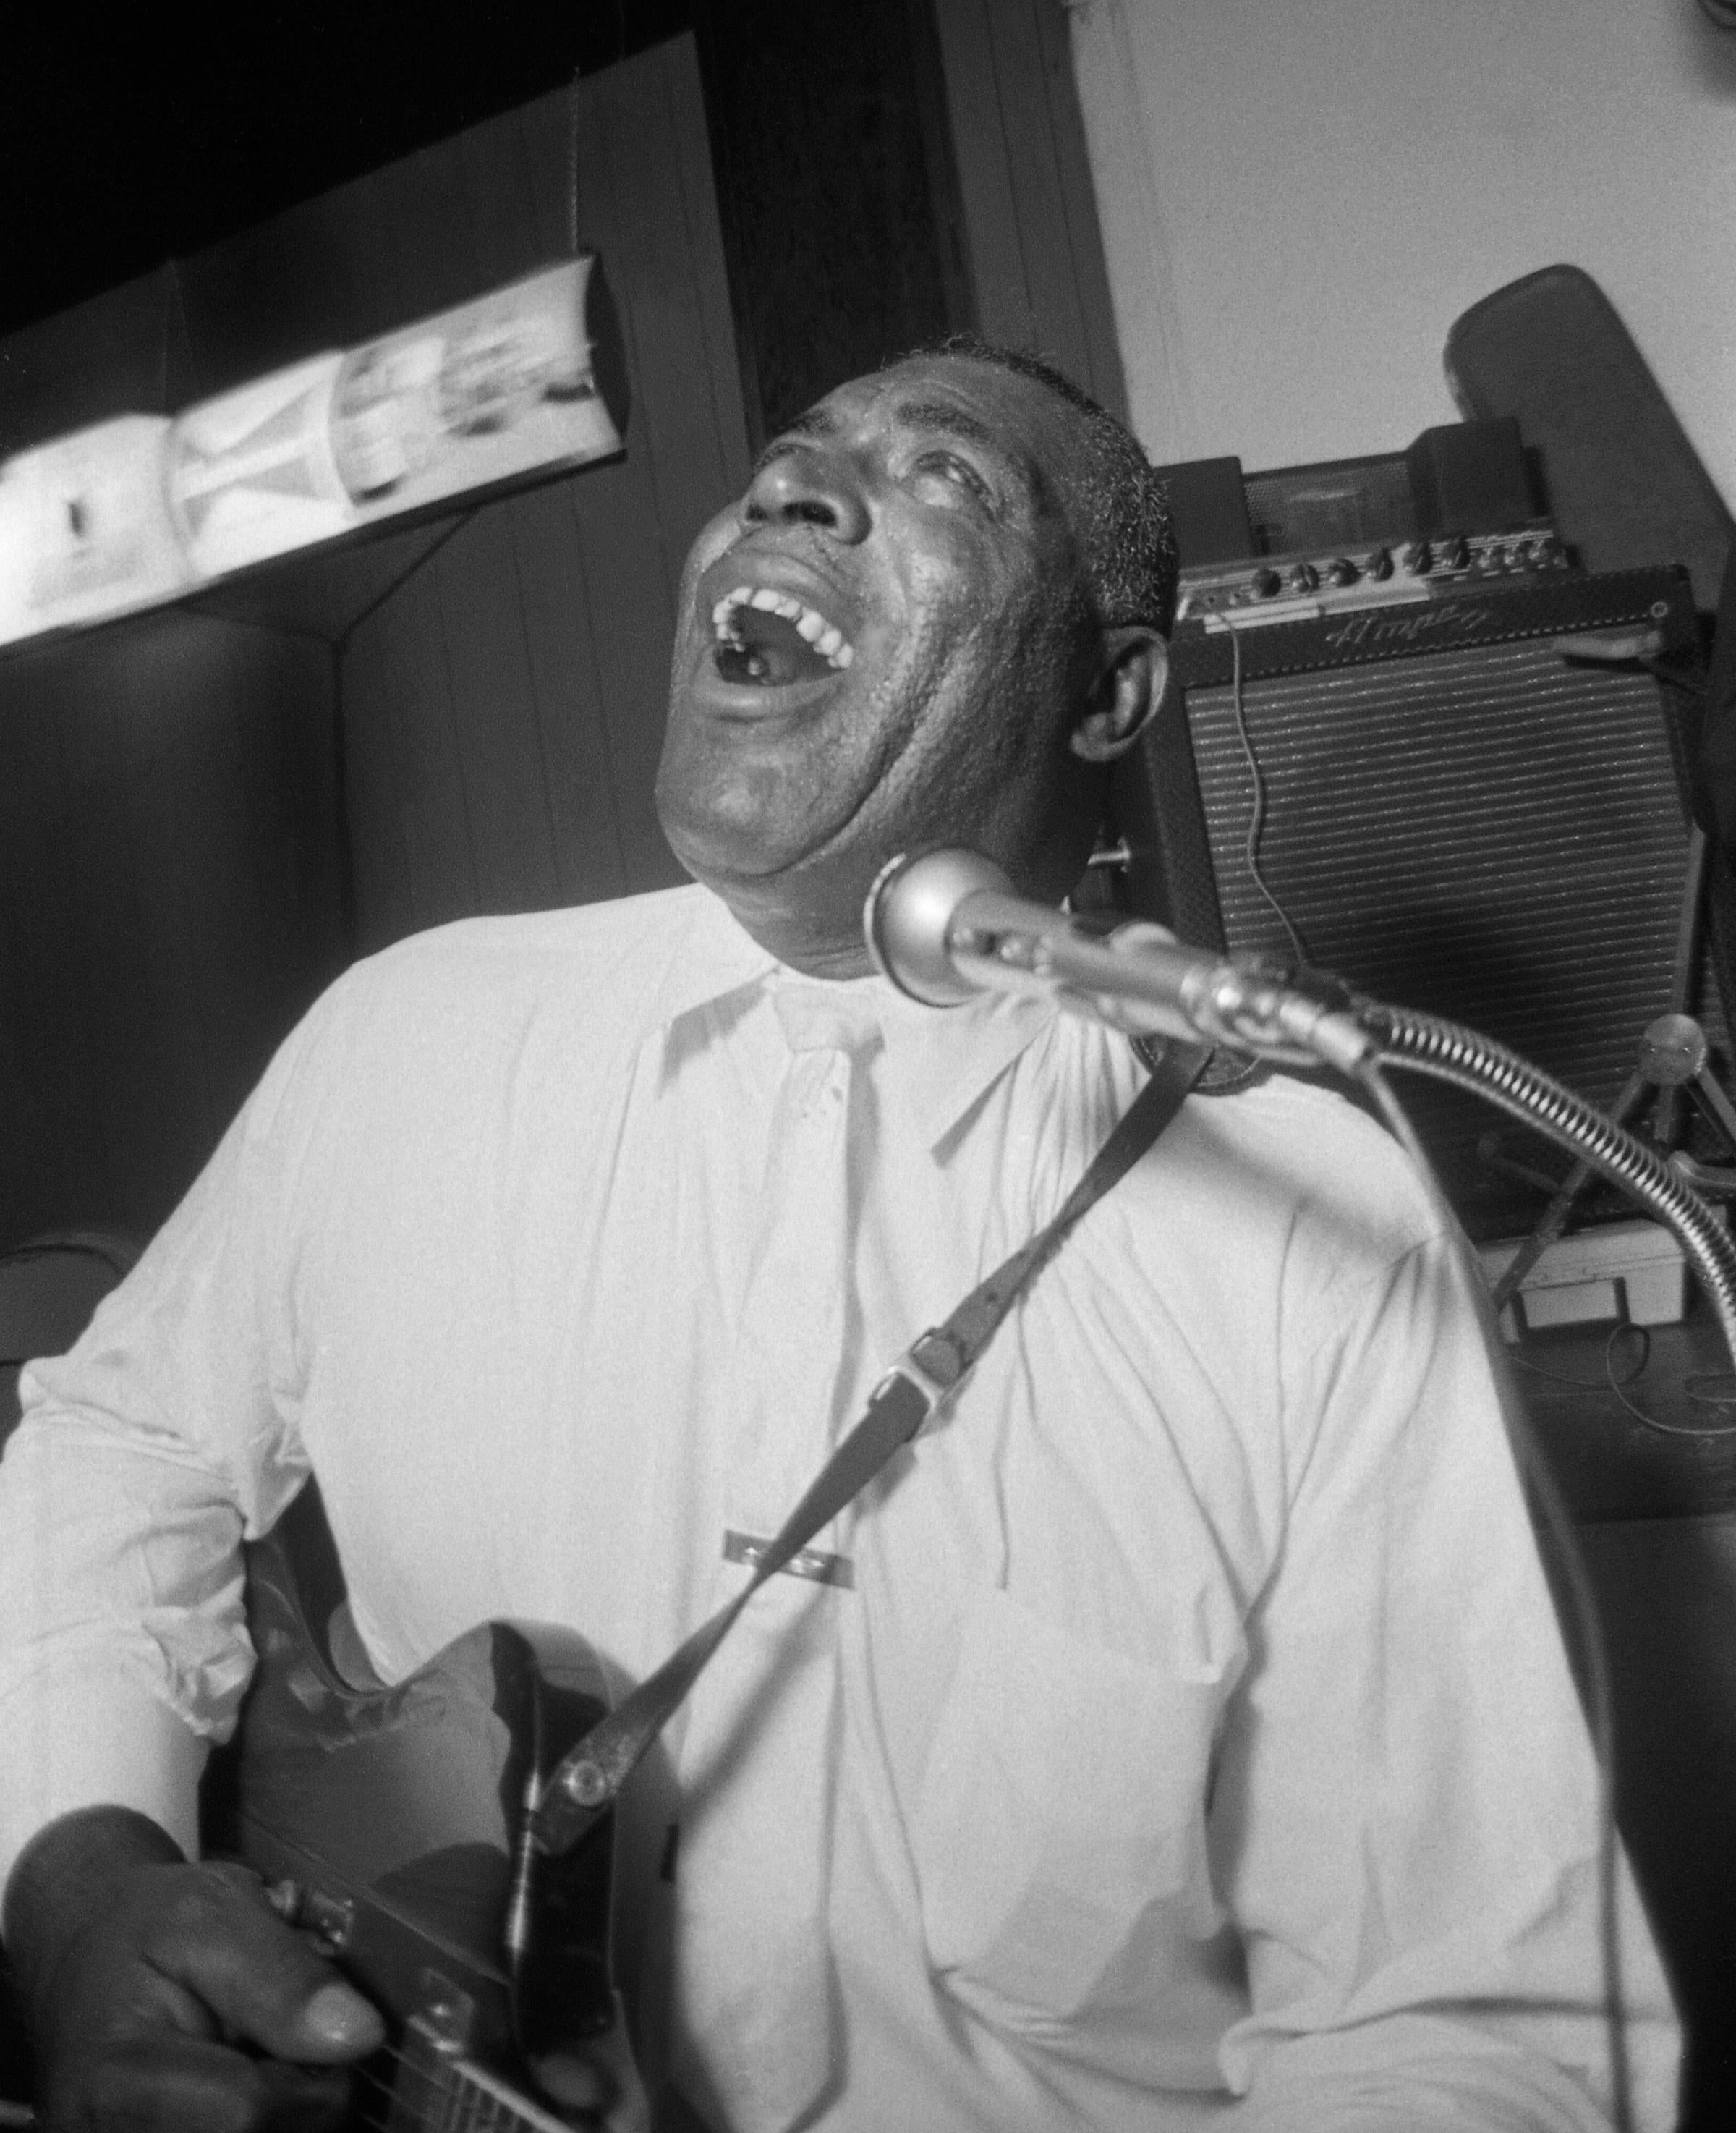 Blues Great Howlin' Wolf, Chicago 1966, Framed Black and White Photo by Art Shay